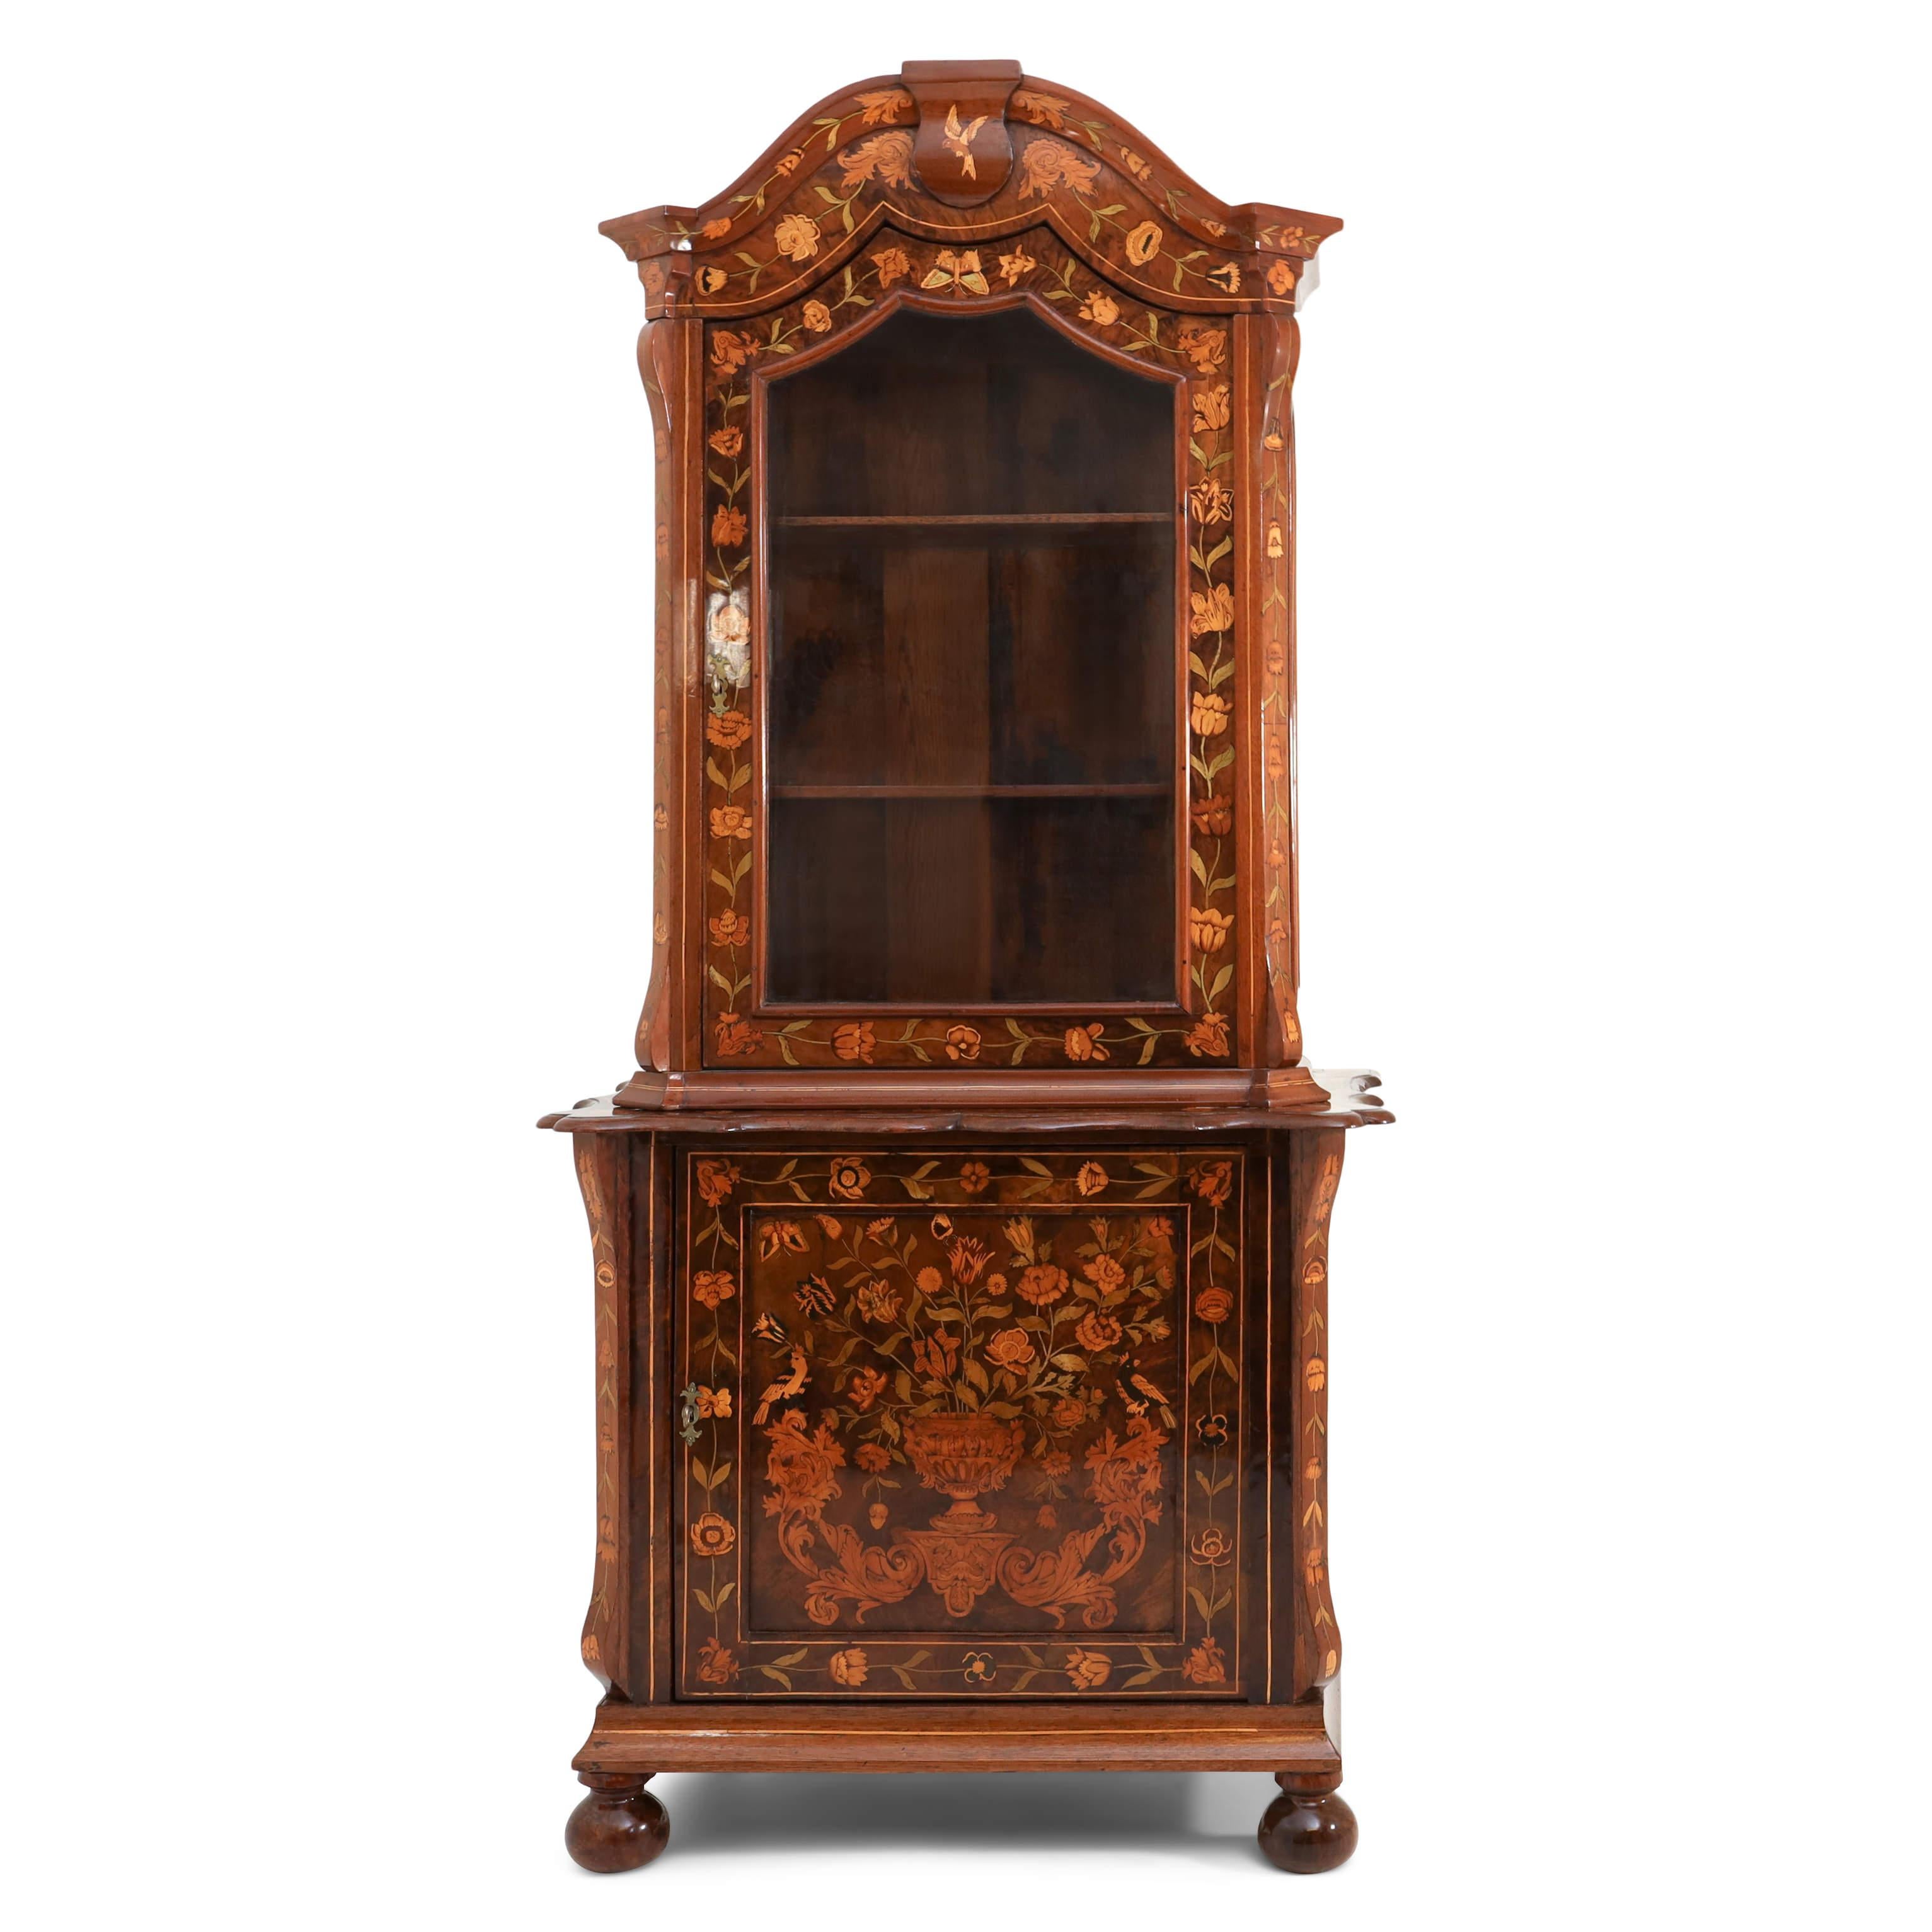 Dutch Baroque style display cabinet with floral marquetry all-over. The single-door base cabinet with wavy top is decorated with a large inlay in the form of a floral bouquet on the door. The top is glazed on three sides and closes with an arch. The